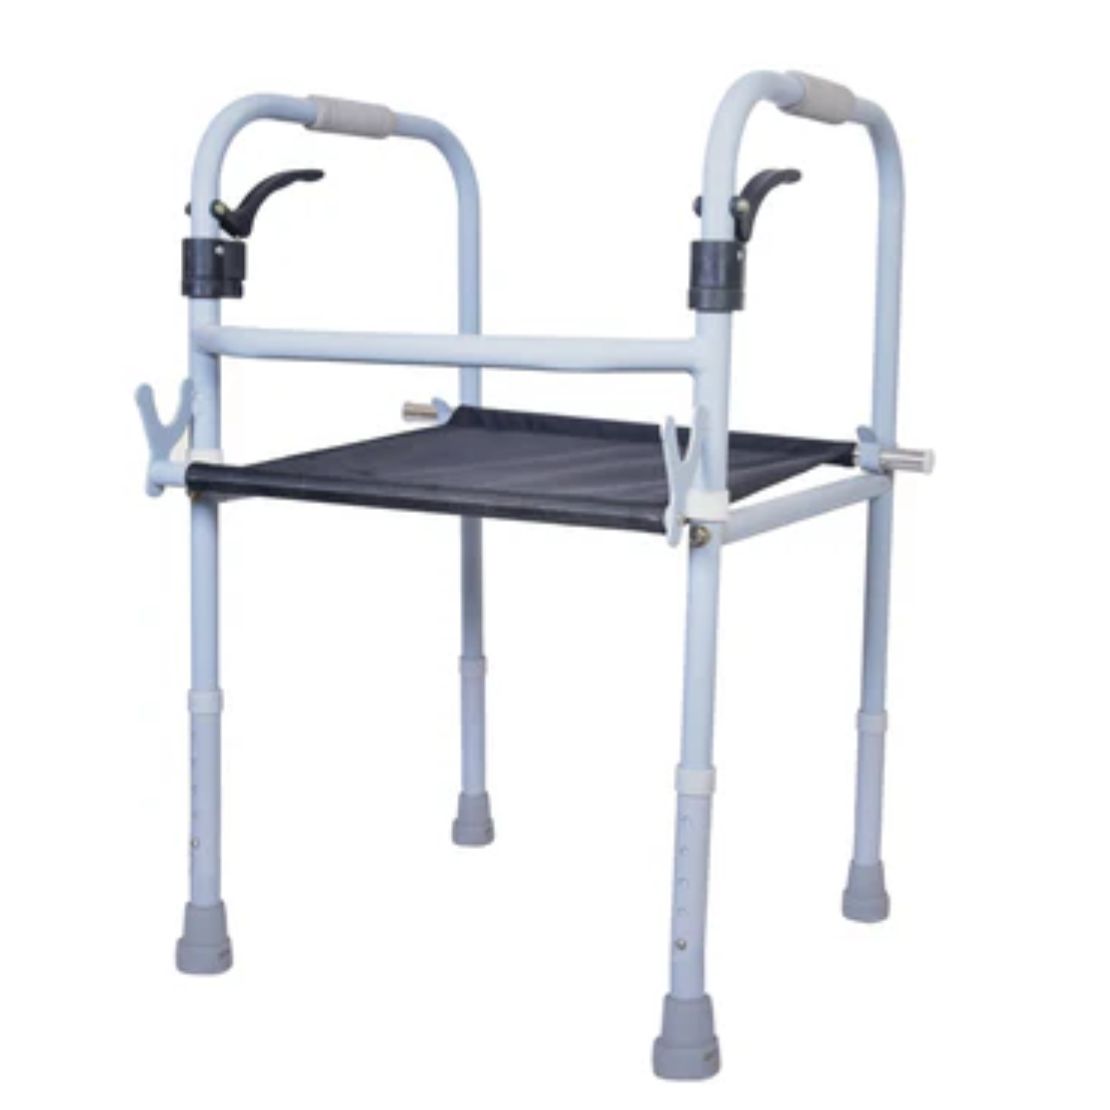 Vissco Dura Step Walker (Aluminium) with Seat Self-standing on four legs, it has a unique lever mechanism that allows you to adjust the height of the walker's front legs according to the need and physical characteristics of the user